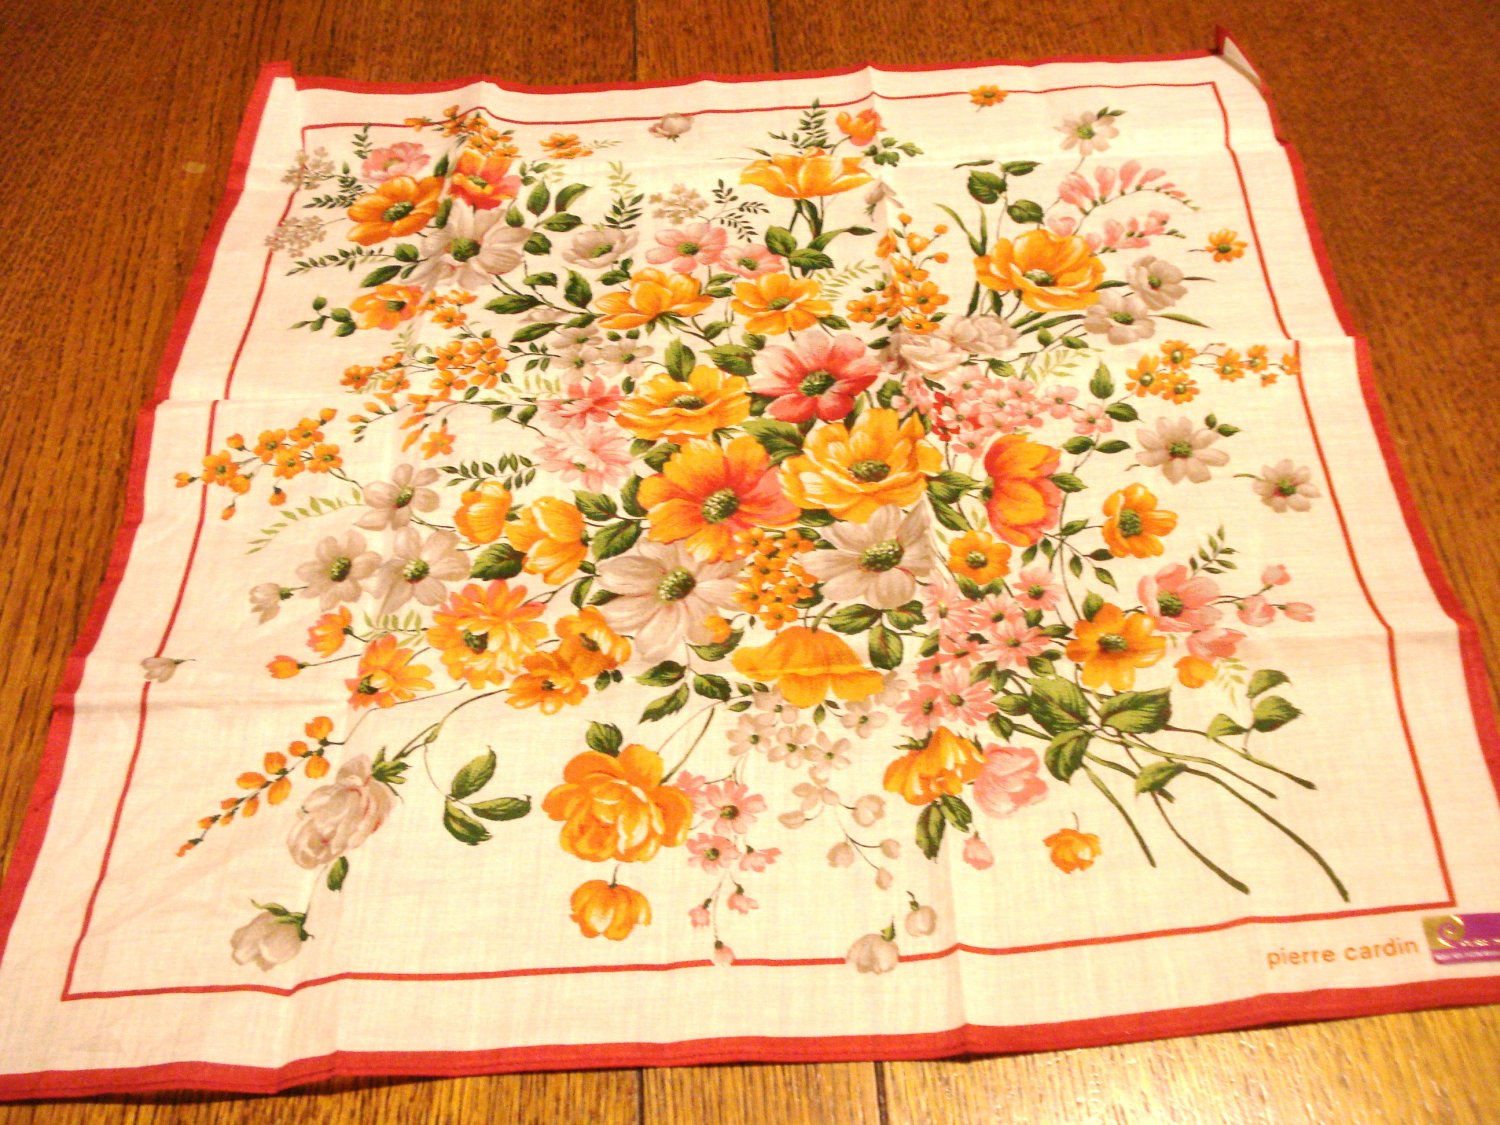 Pierre Cardin floral cotton kerchief small scarf unused with tags ll3154